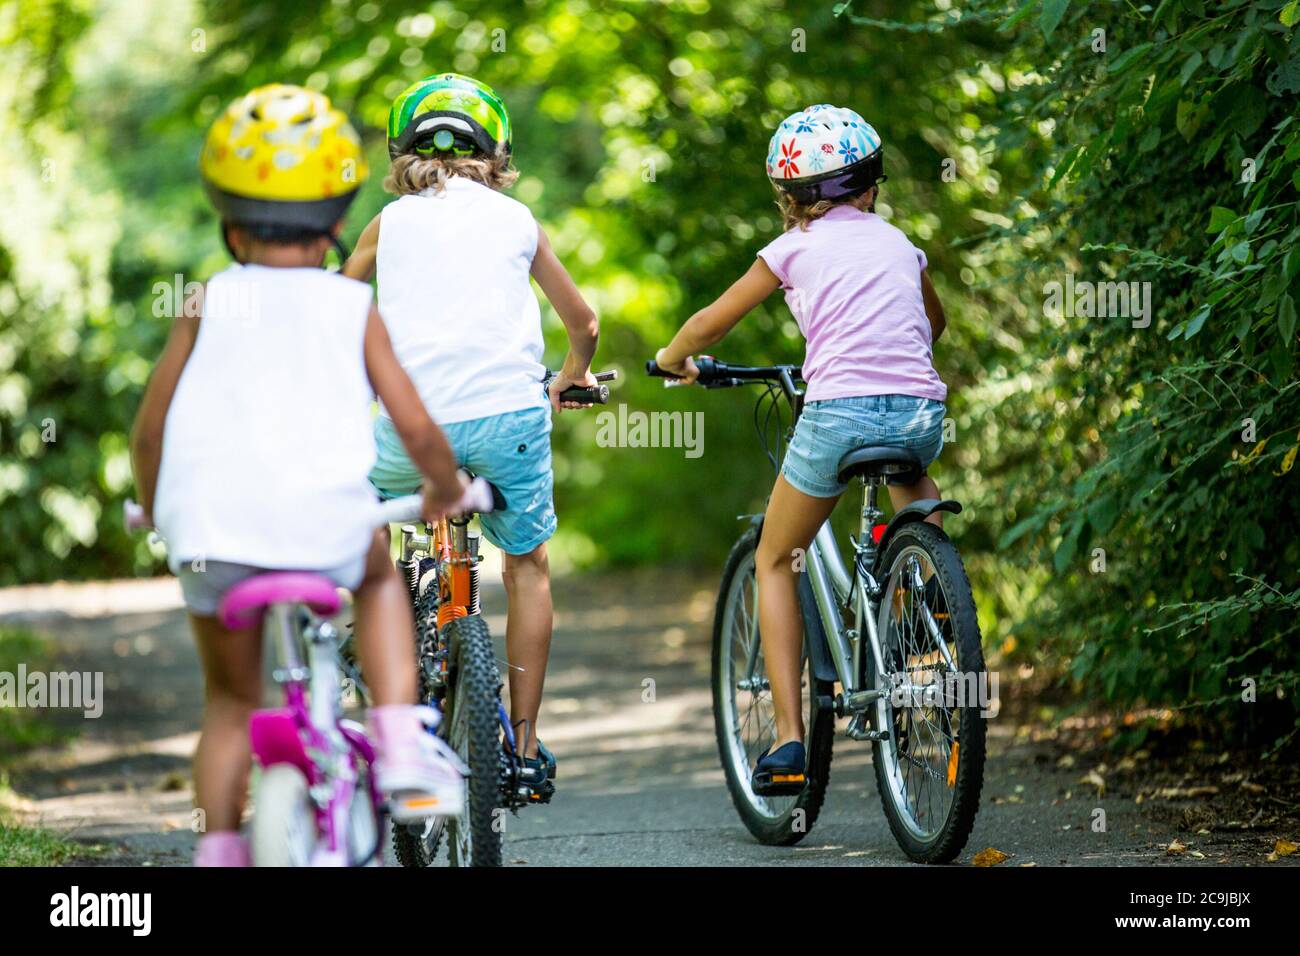 Children wearing helmets and cycling in park. Stock Photo